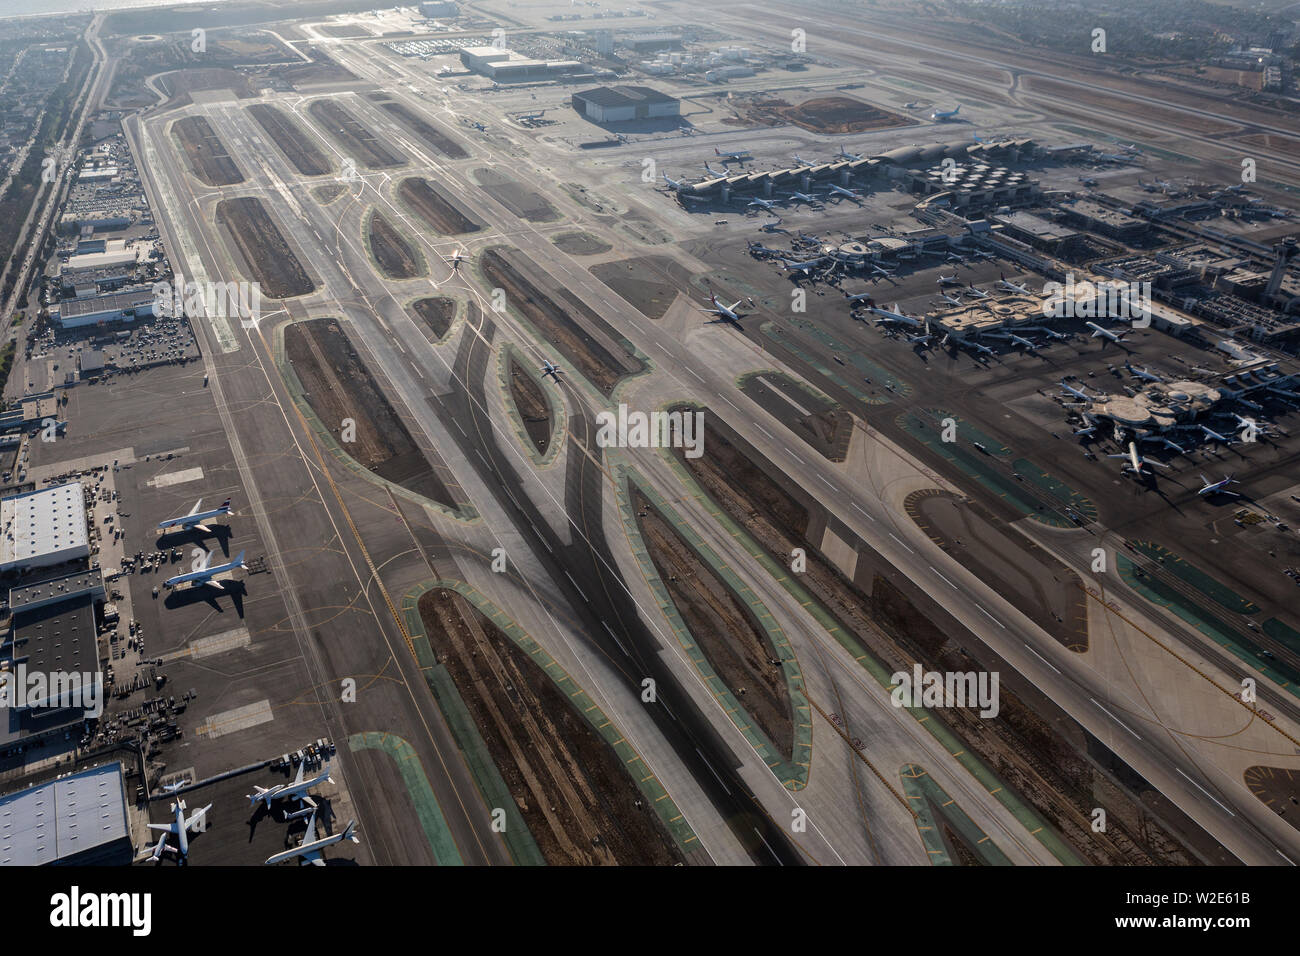 Los Angeles, California, USA - August 16, 2016:  Aerial view of runway and terminals at LAX airport in Southern California. Stock Photo